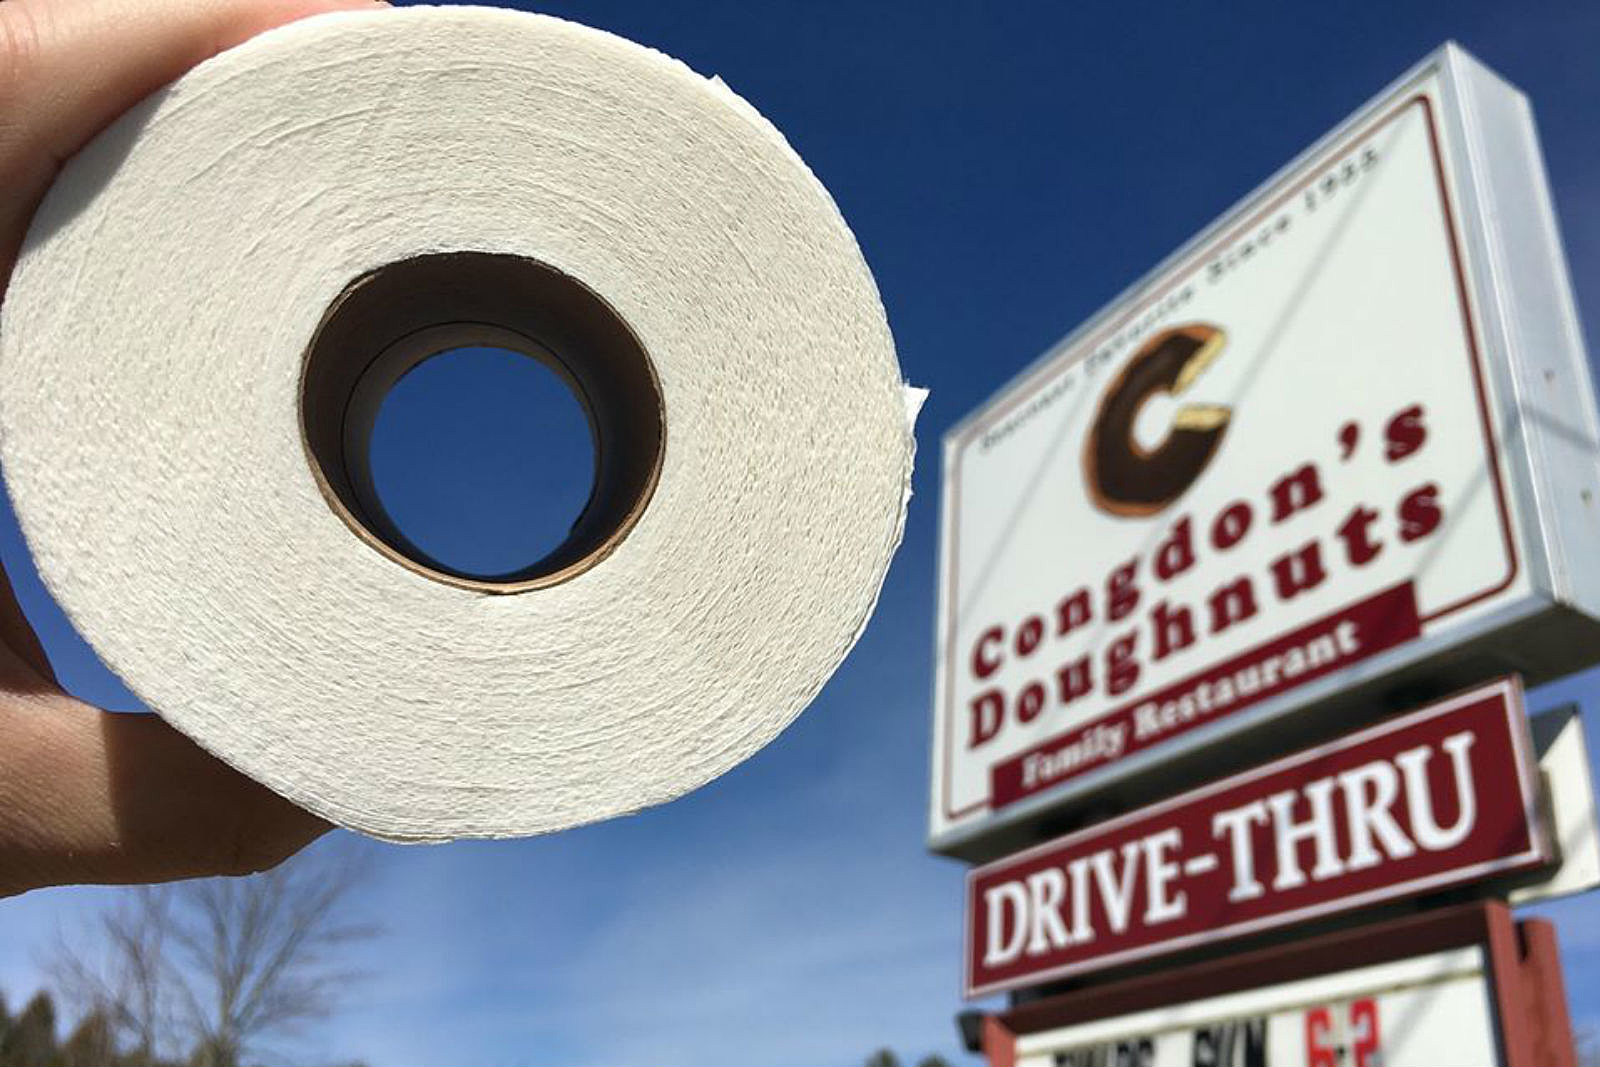 A Maine Donut Shop Is Giving Away Free TP To Those In Need